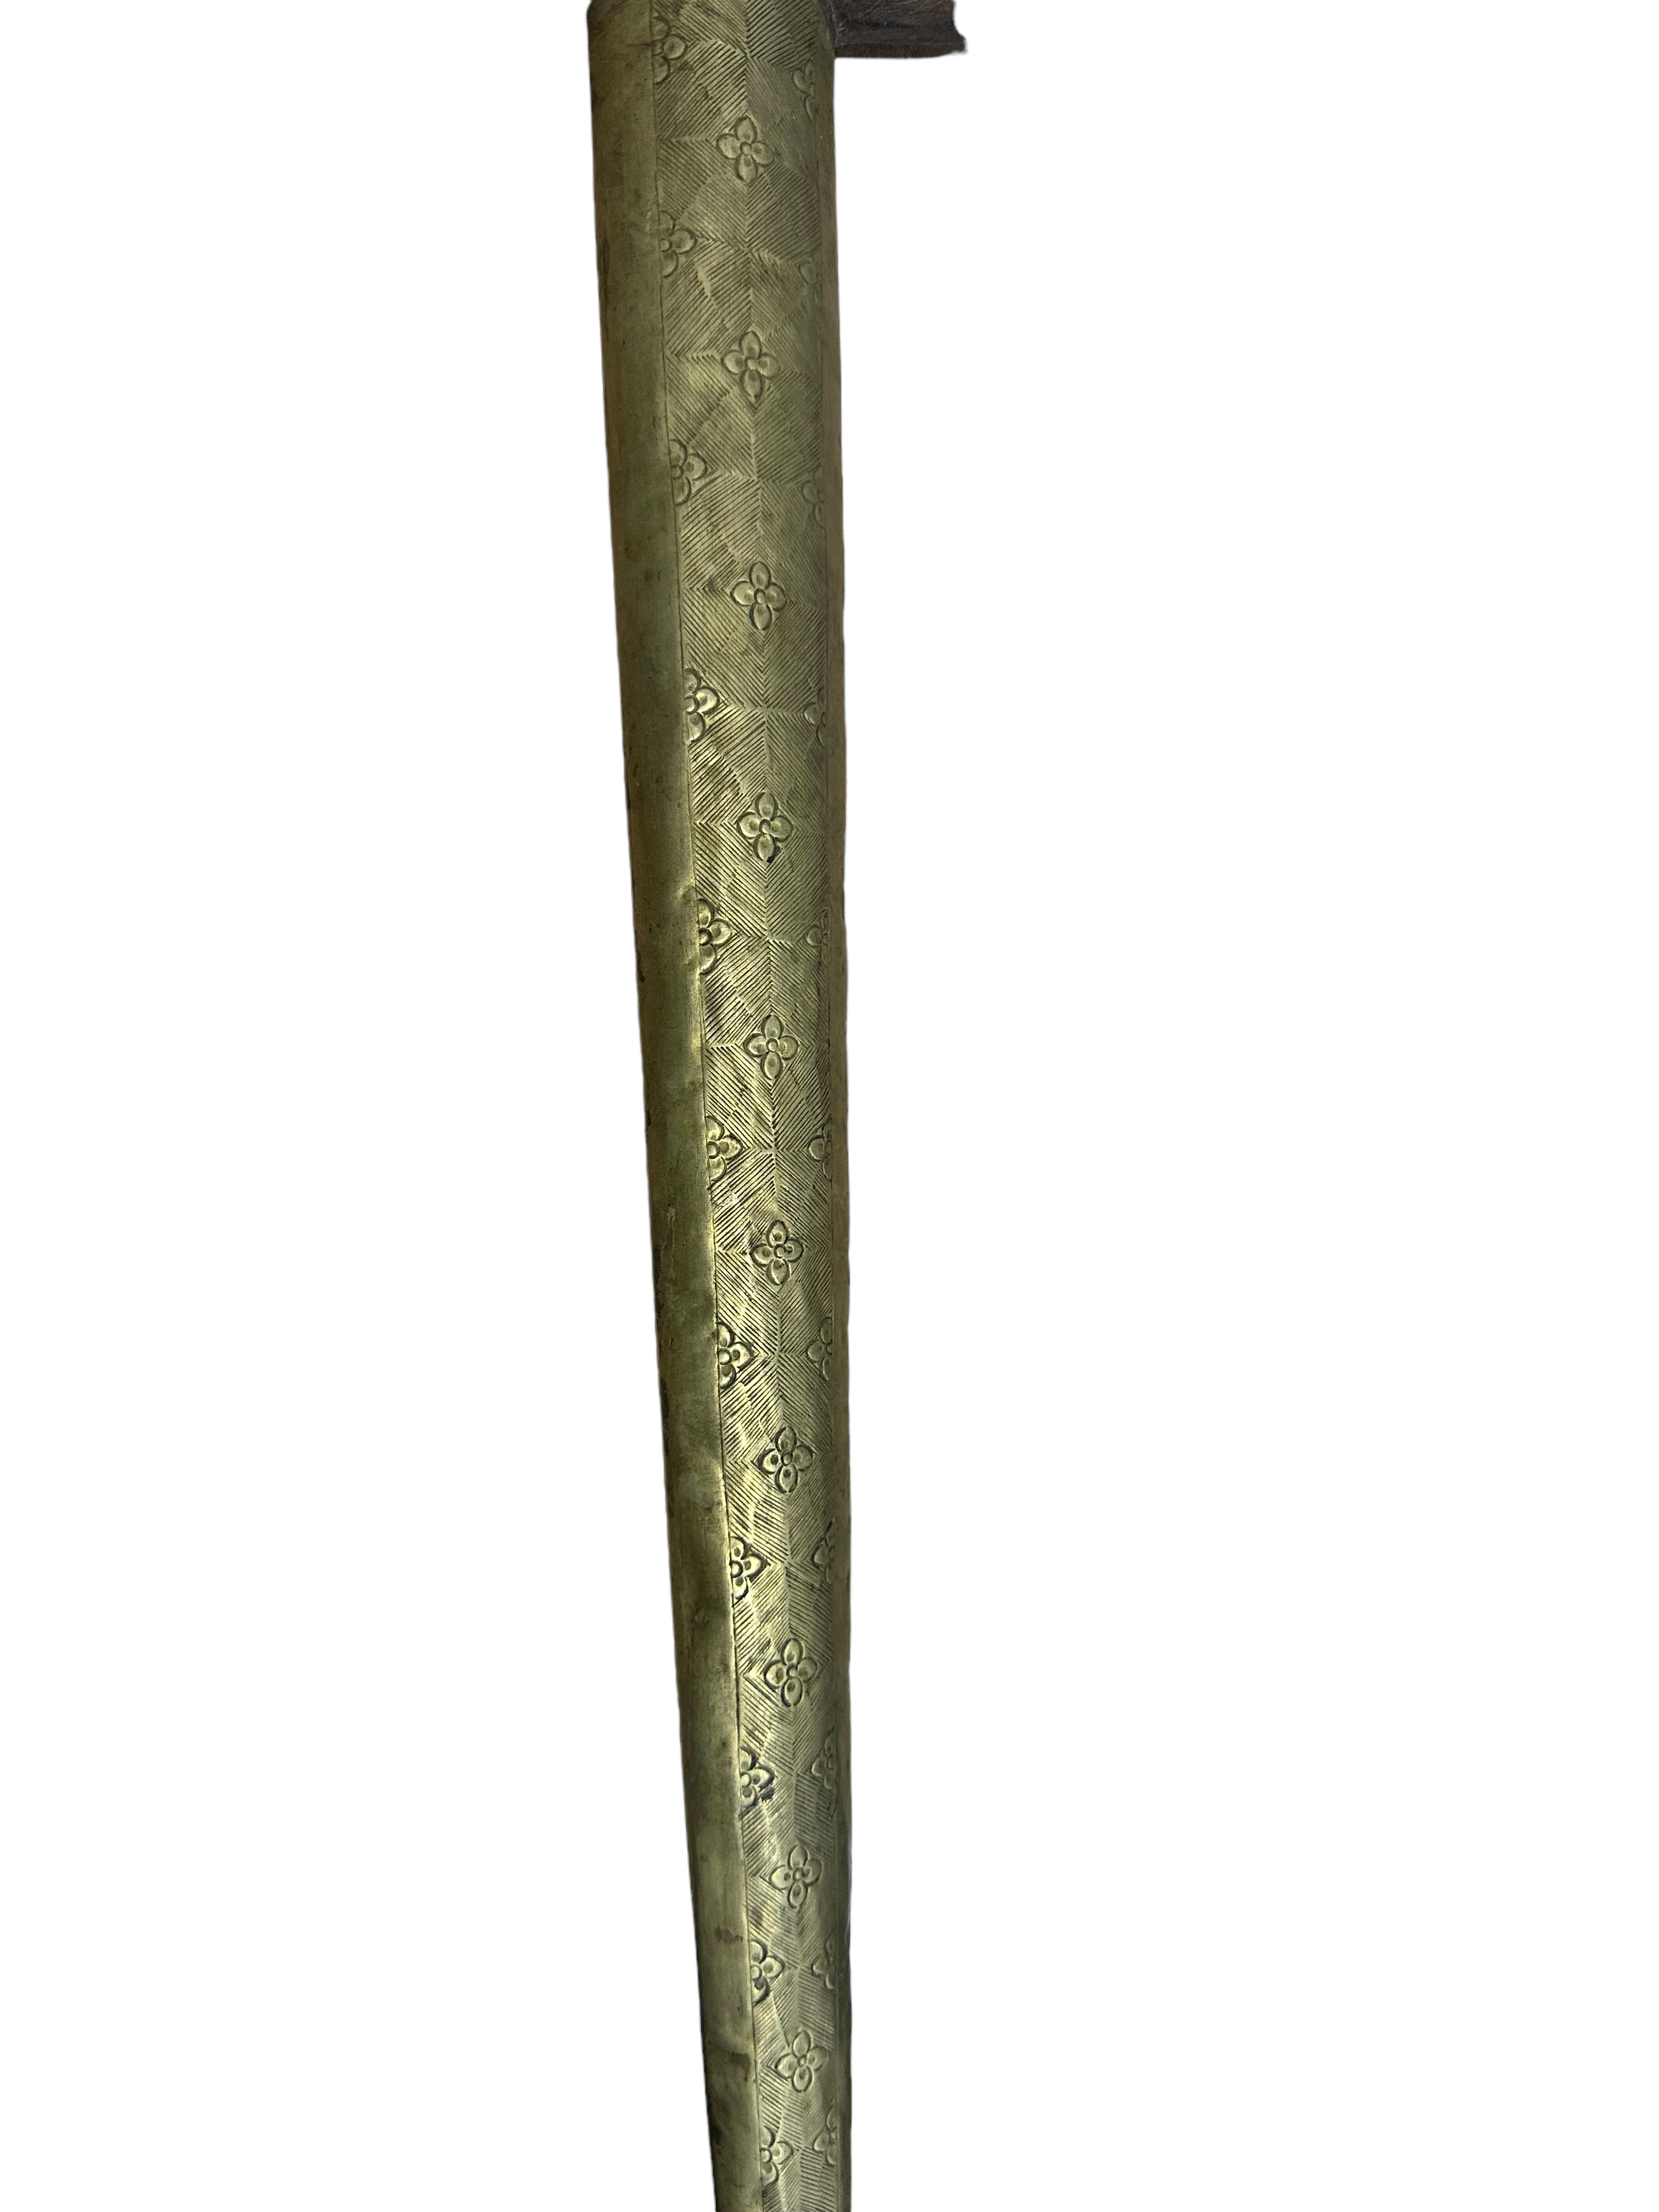 Antique Malaysian Kris with Brass and Wood Scabbard - Blade 31.5cm long - overall 51.5cm long. - Image 3 of 10